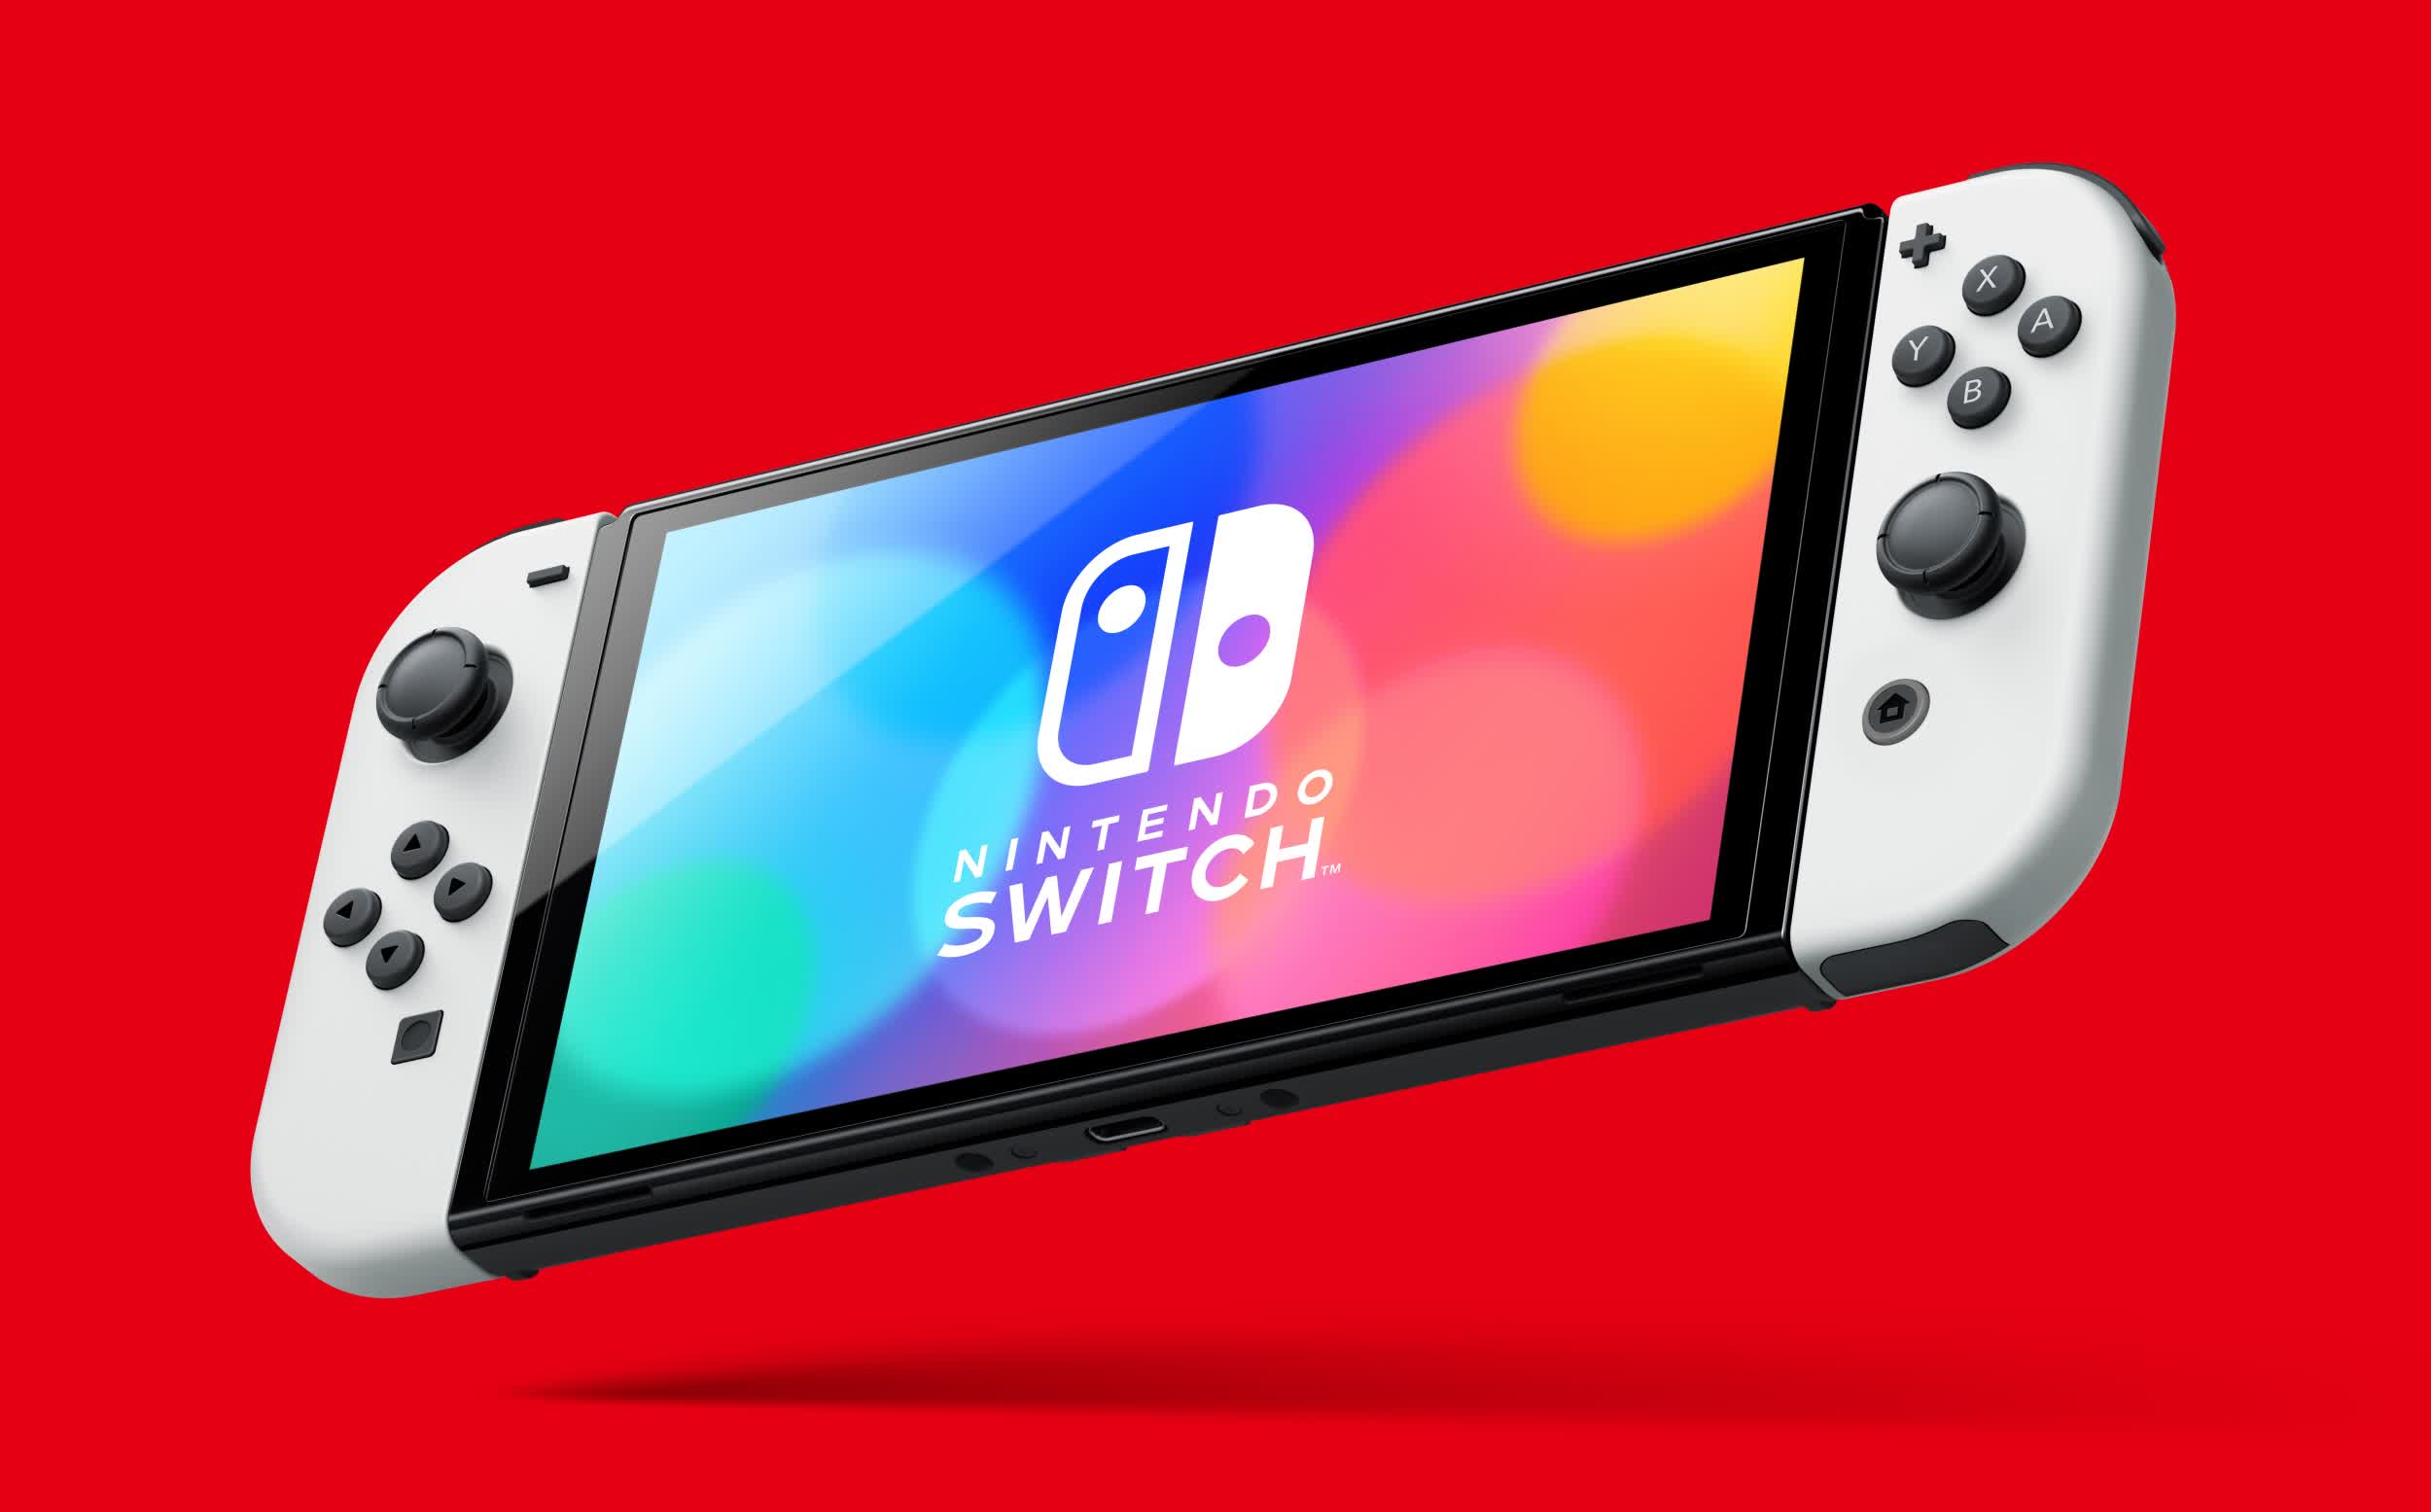 Nintendo announces updated Switch with a larger OLED display, 64GB of storage, improved audio, and more